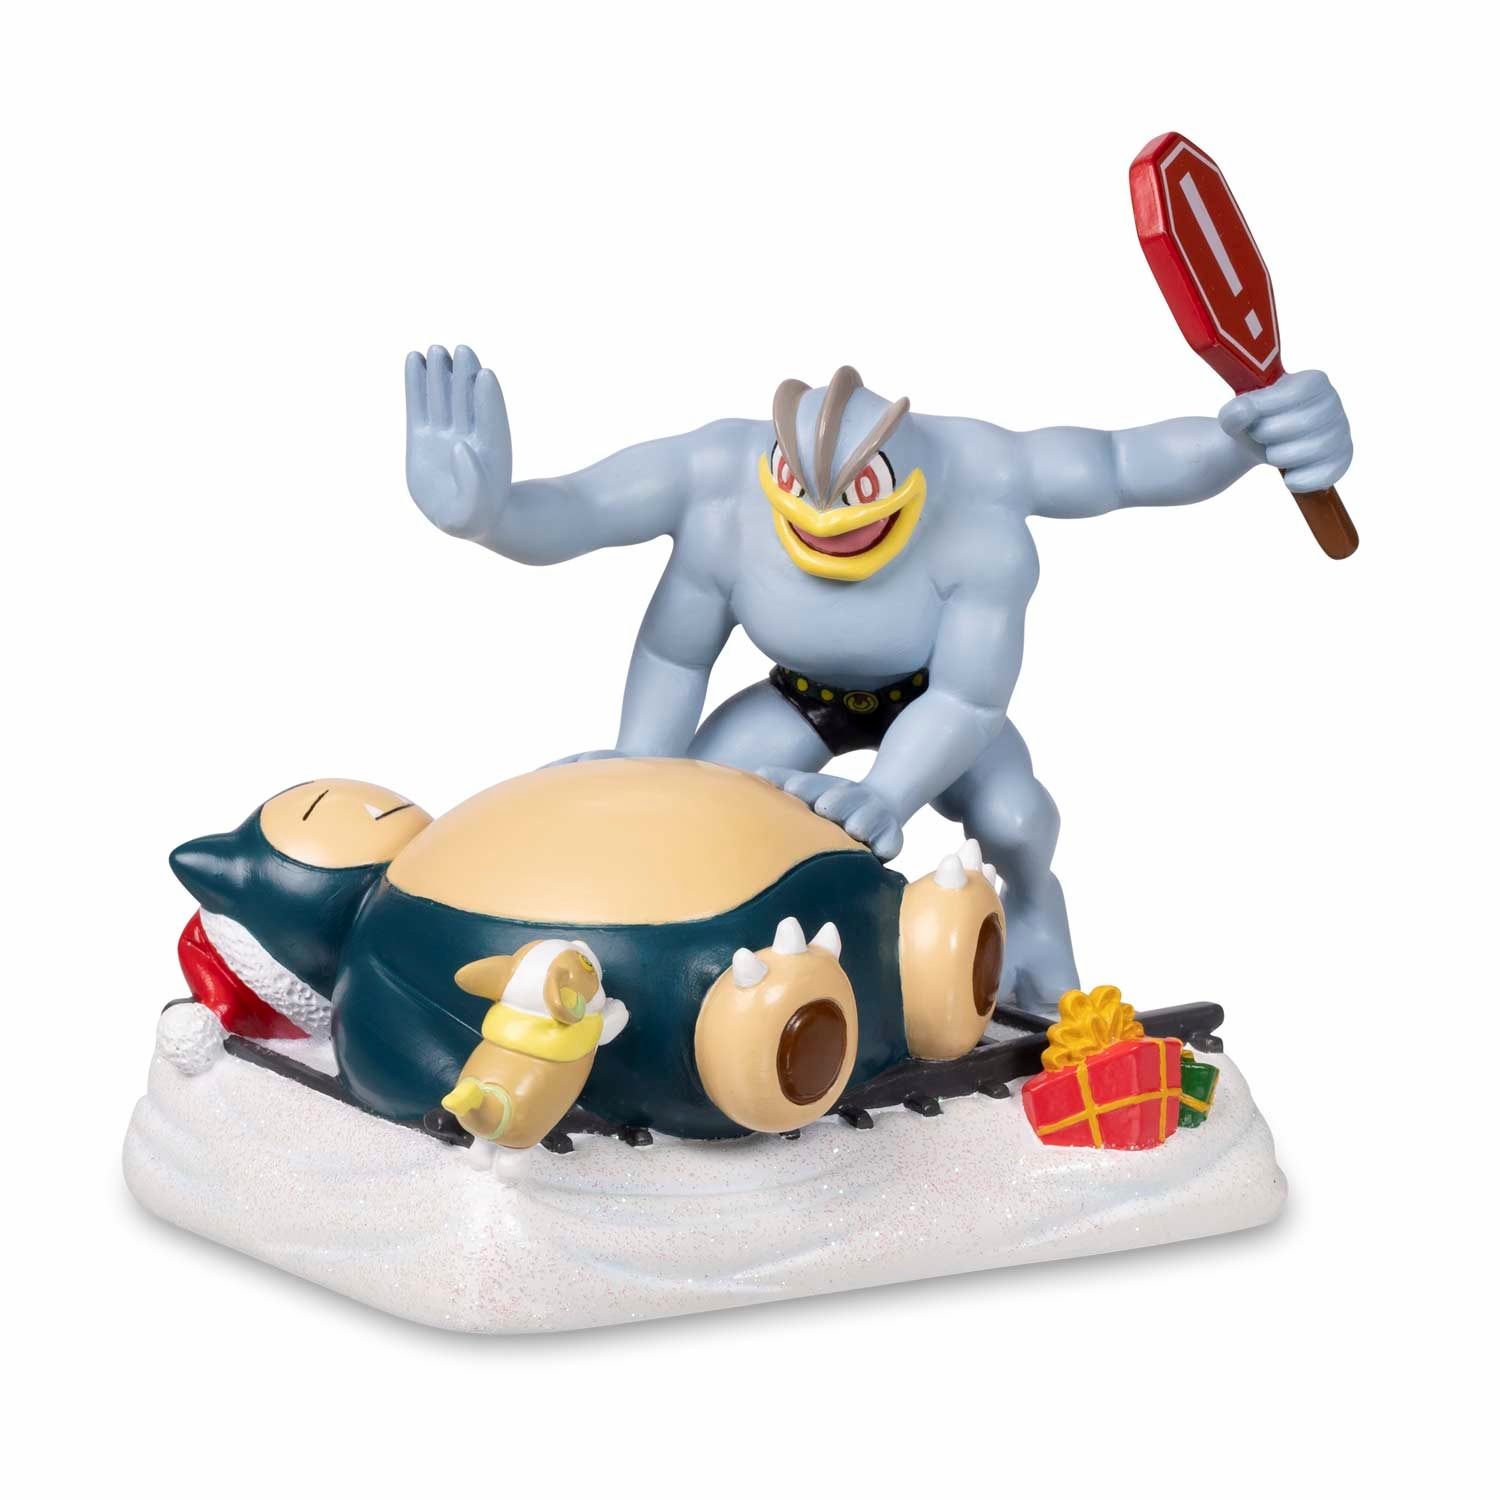 Delibird_Holiday_Express_Snorlax_Pass_Figure_Product_Image.jpg